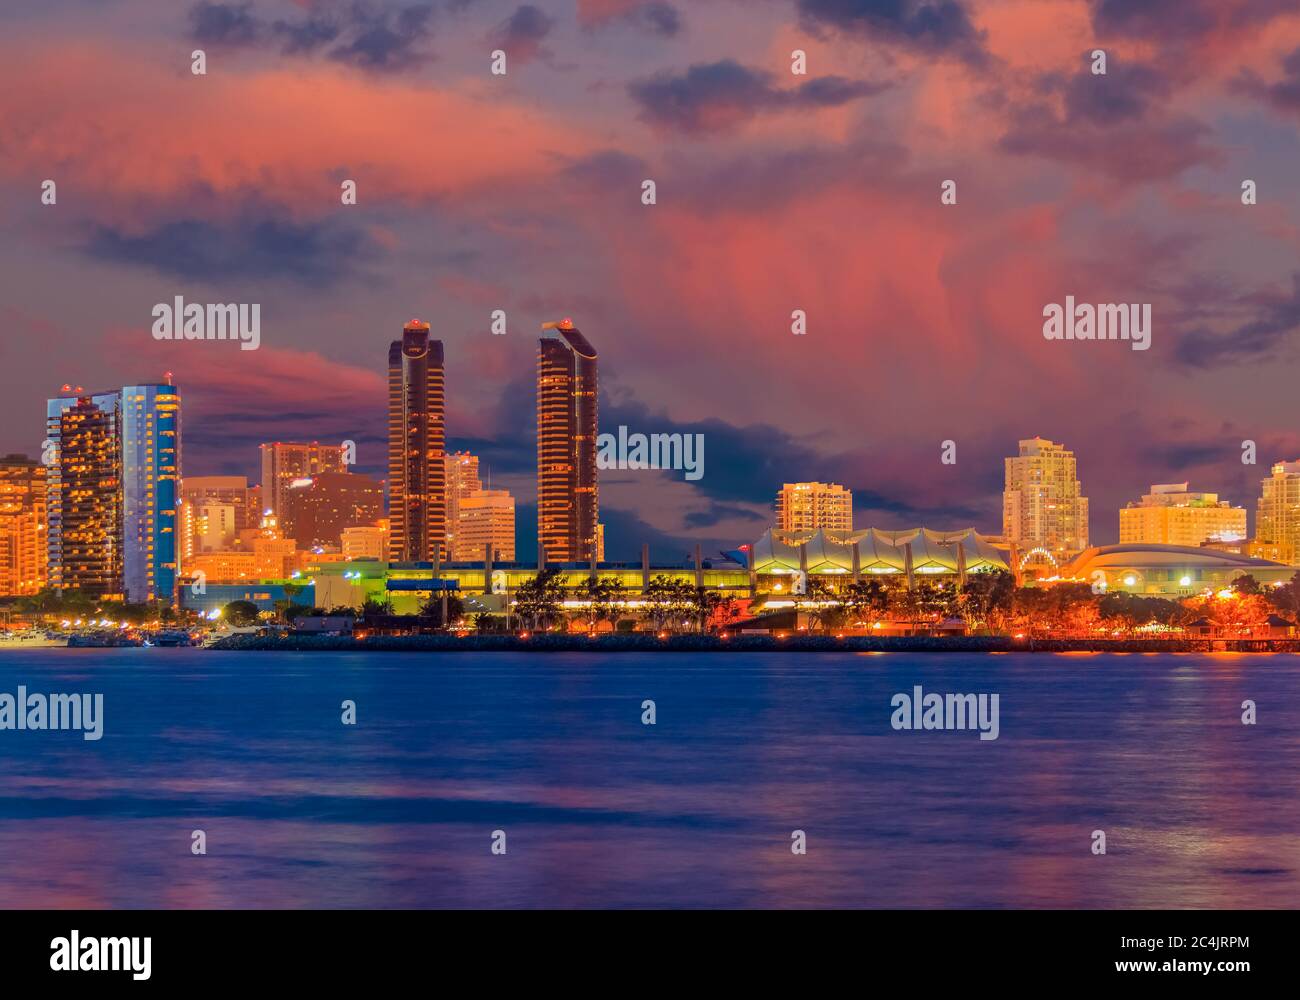 San Diego Bay is filled with color from the sunset and night lights of the San Diego skyline. Stock Photo